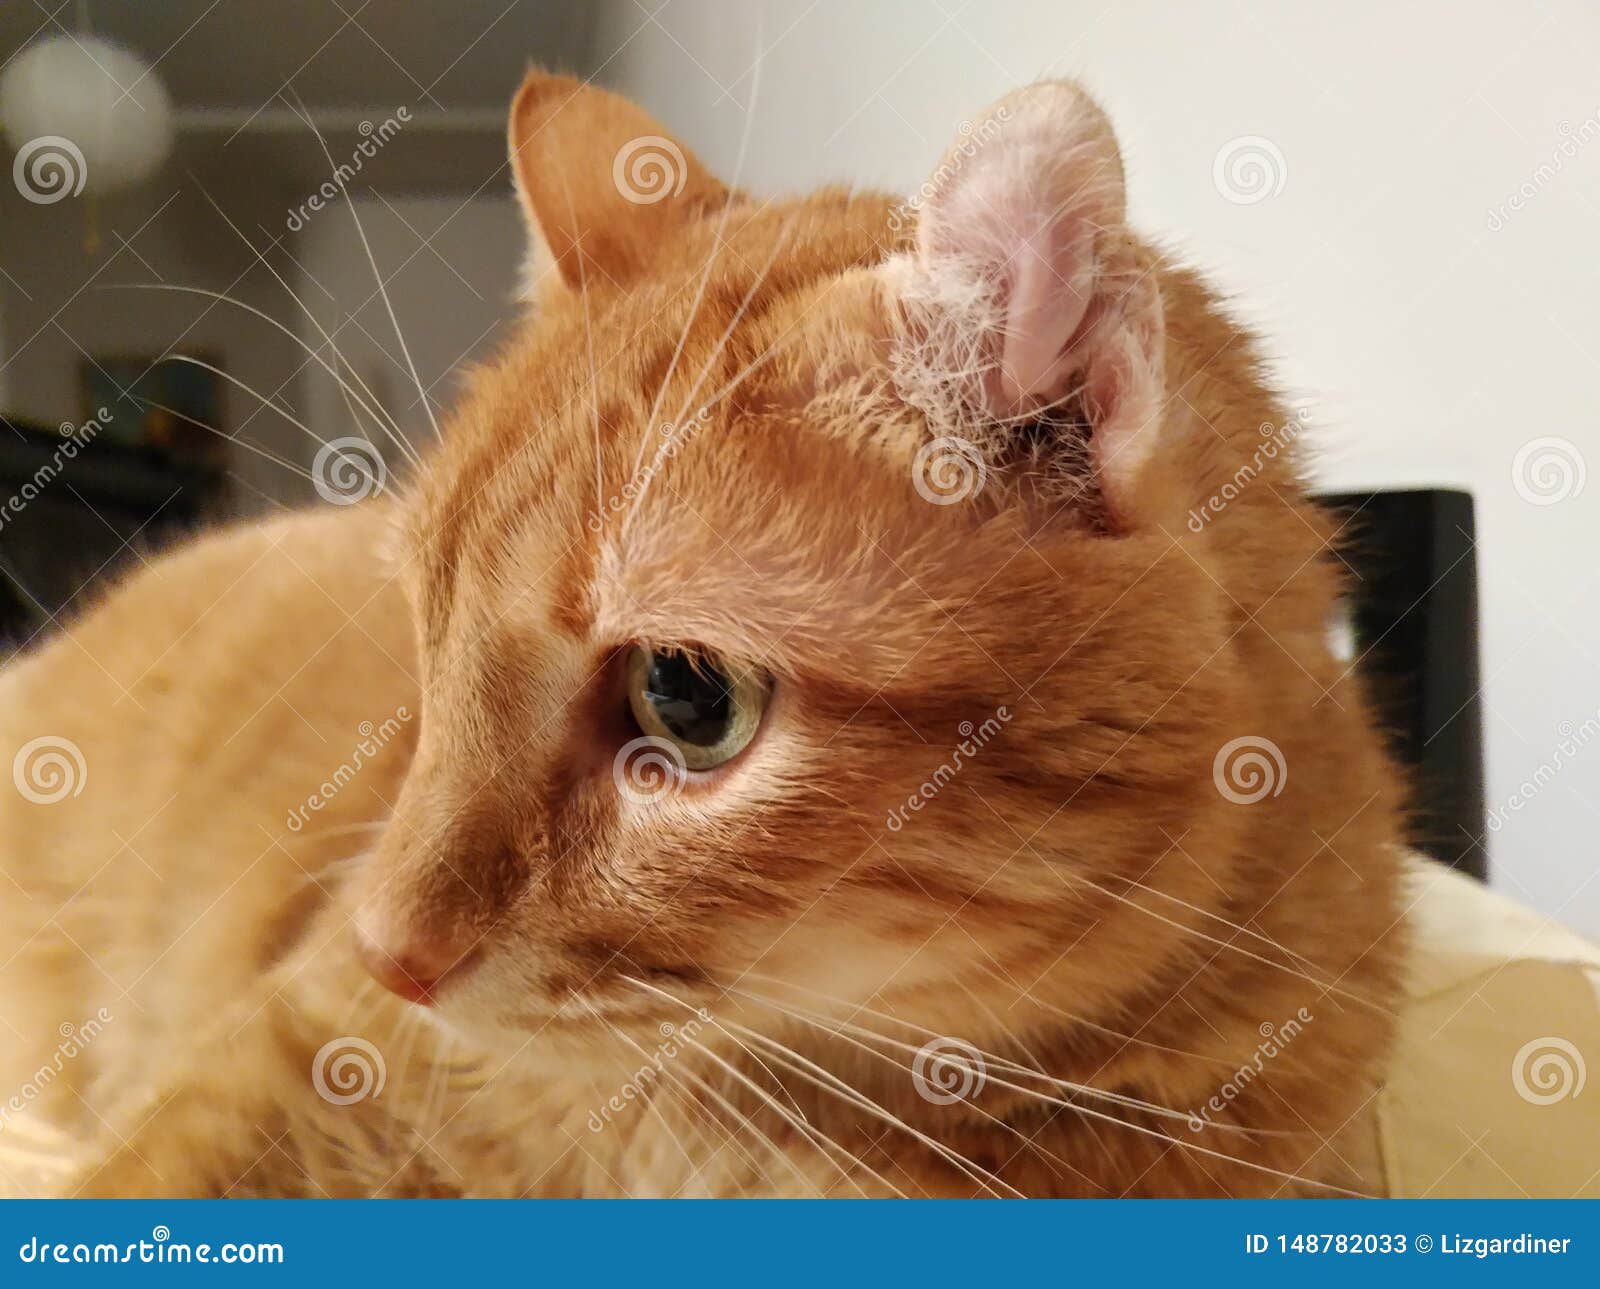 Cat's Ear Hematoma Caused By Infection Stock Image Image of unhealthy